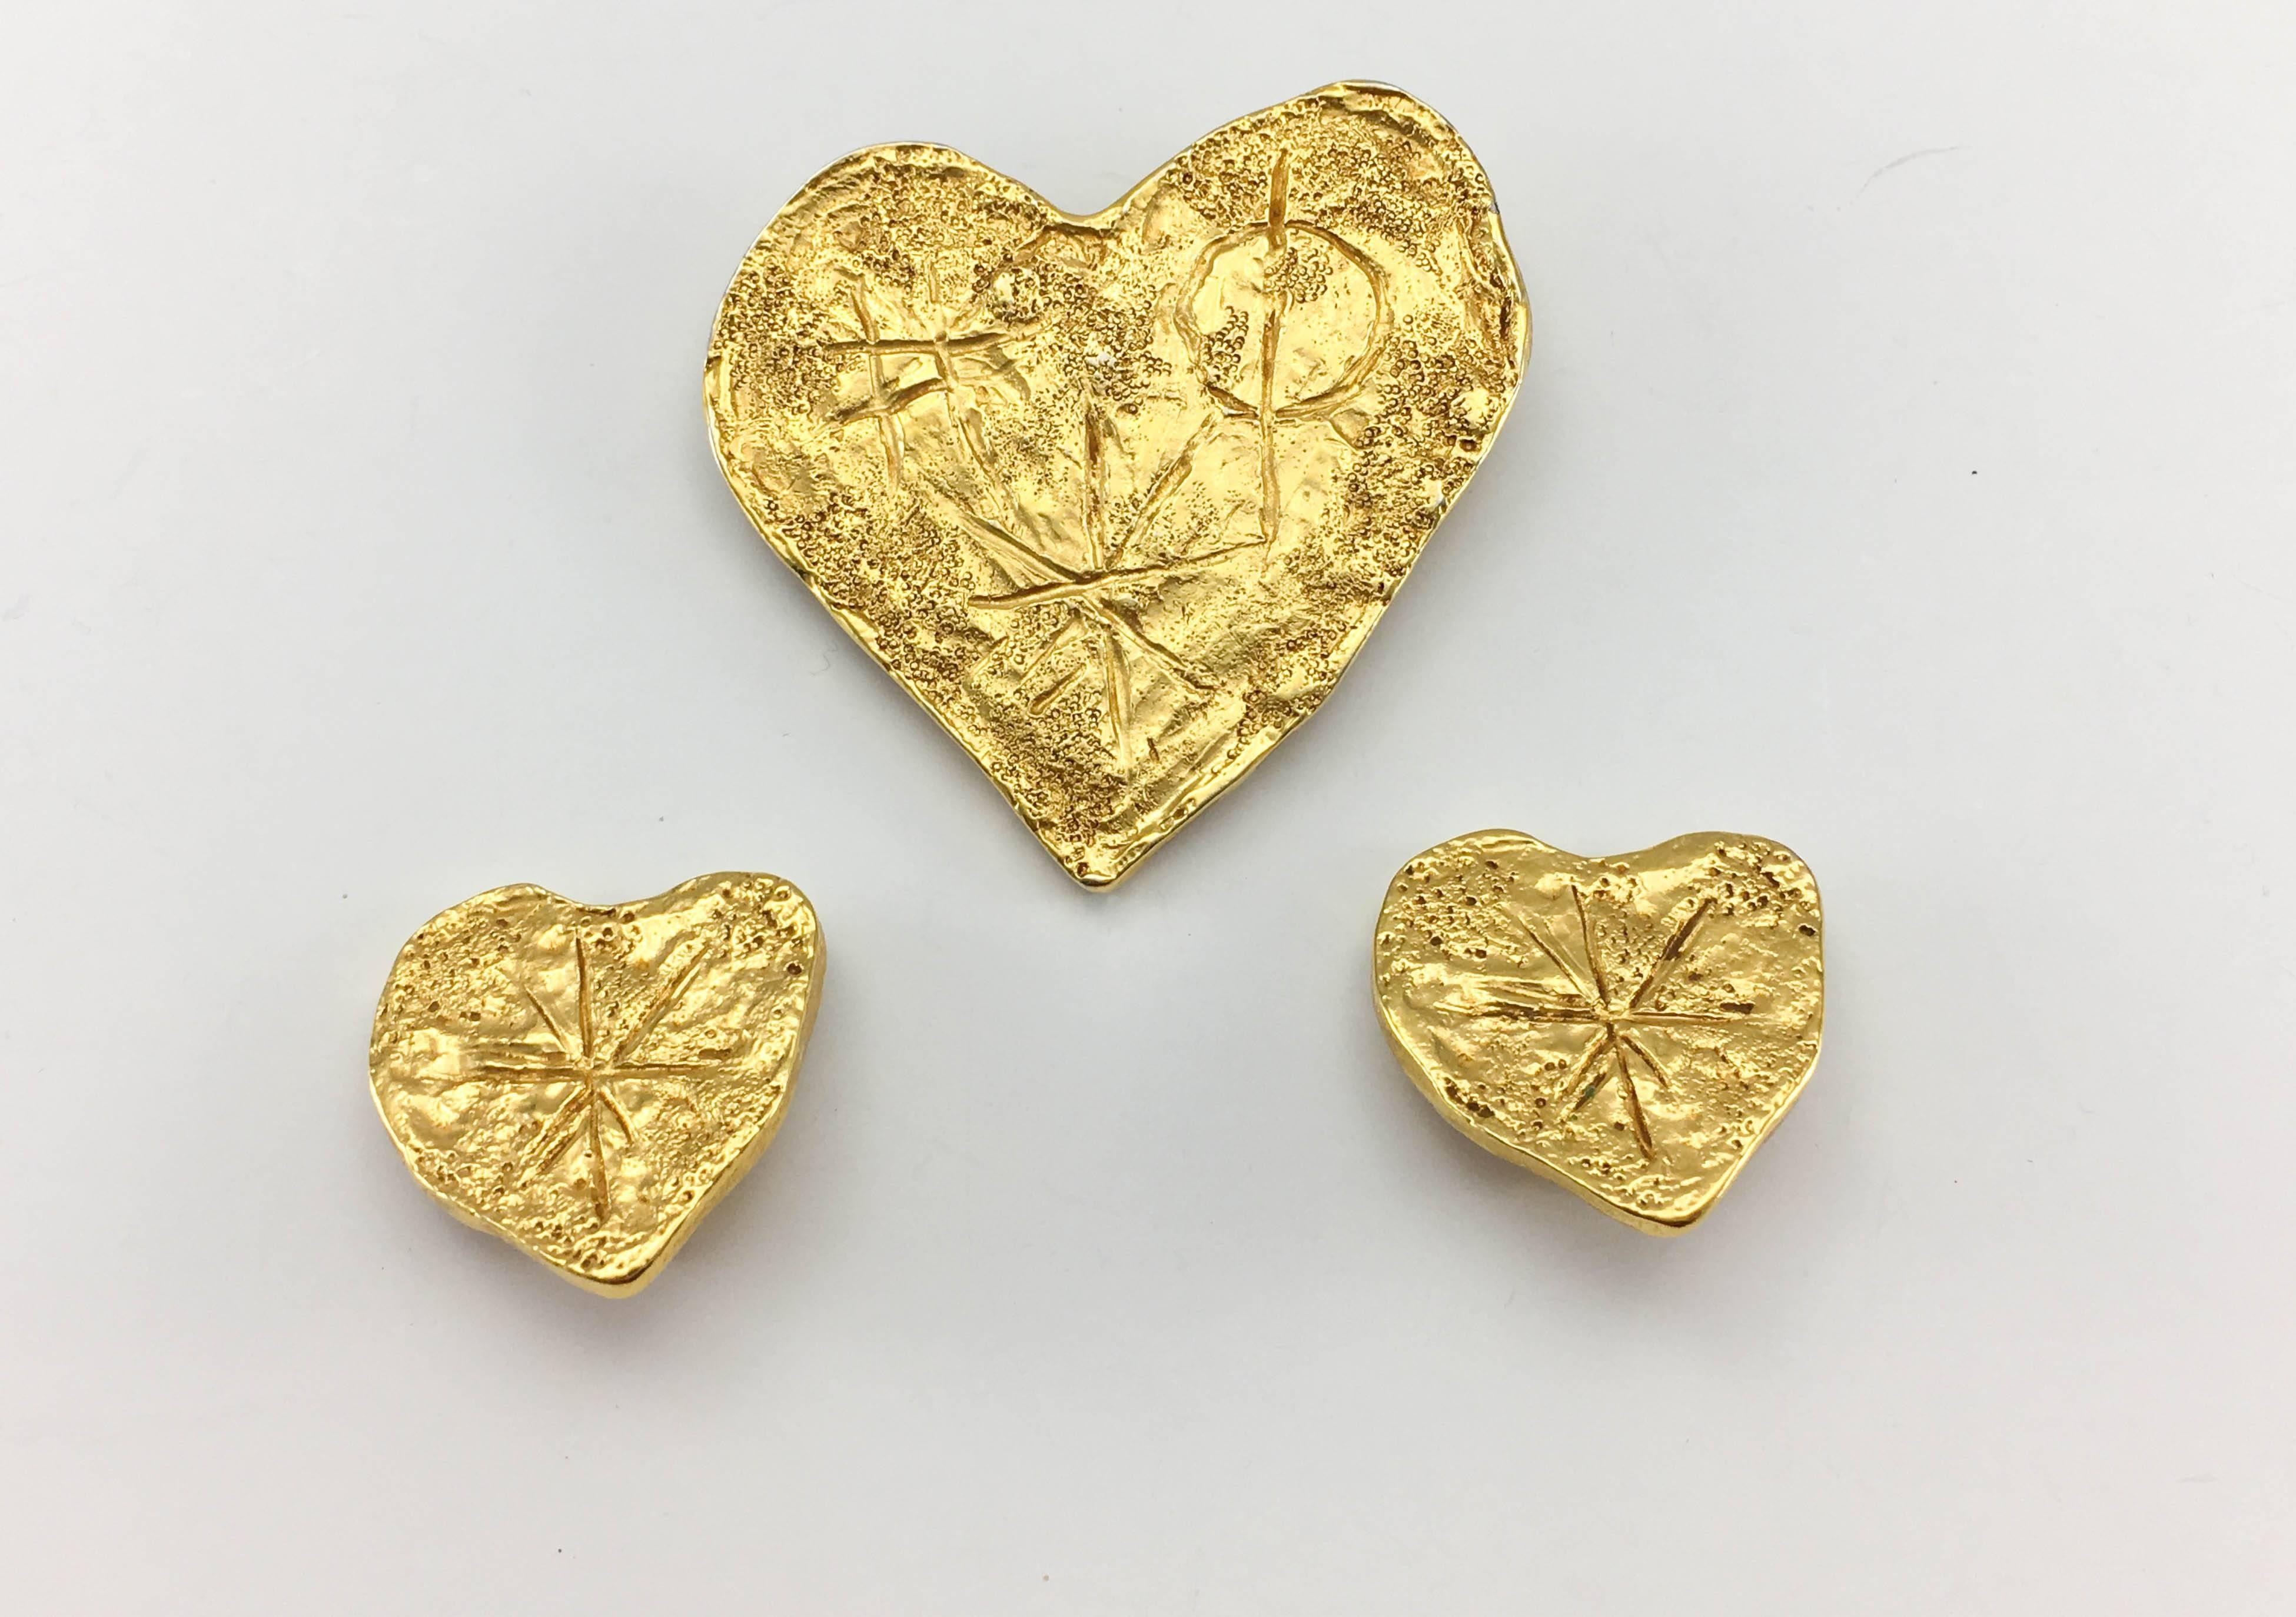 Vintage Christian Lacroix Gold-Plated Texturized Brooch and Earrings Heart Set. This striking set by Christian Lacroix by Goossens was created in 1994. Comprising of a pair of clip-on earrings and a brooch, the set bears a modernist design.